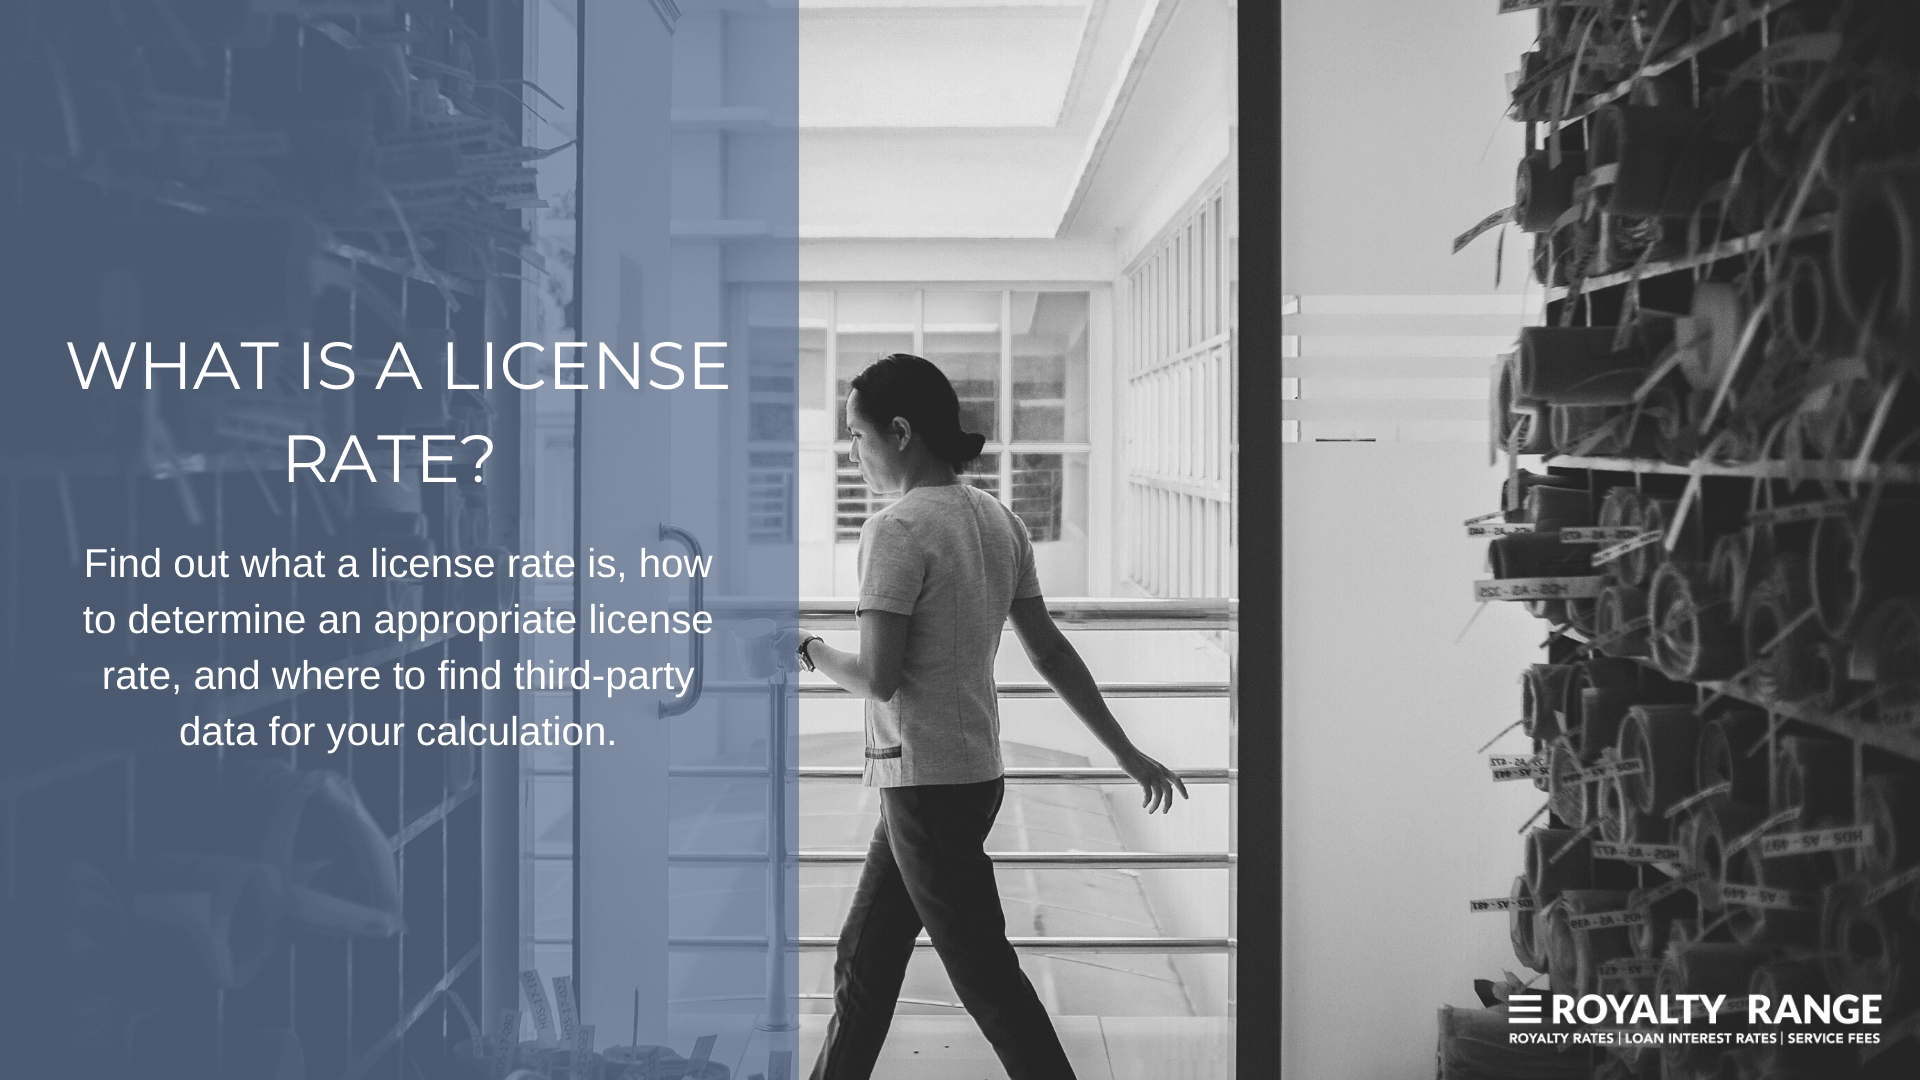 What is a license rate?